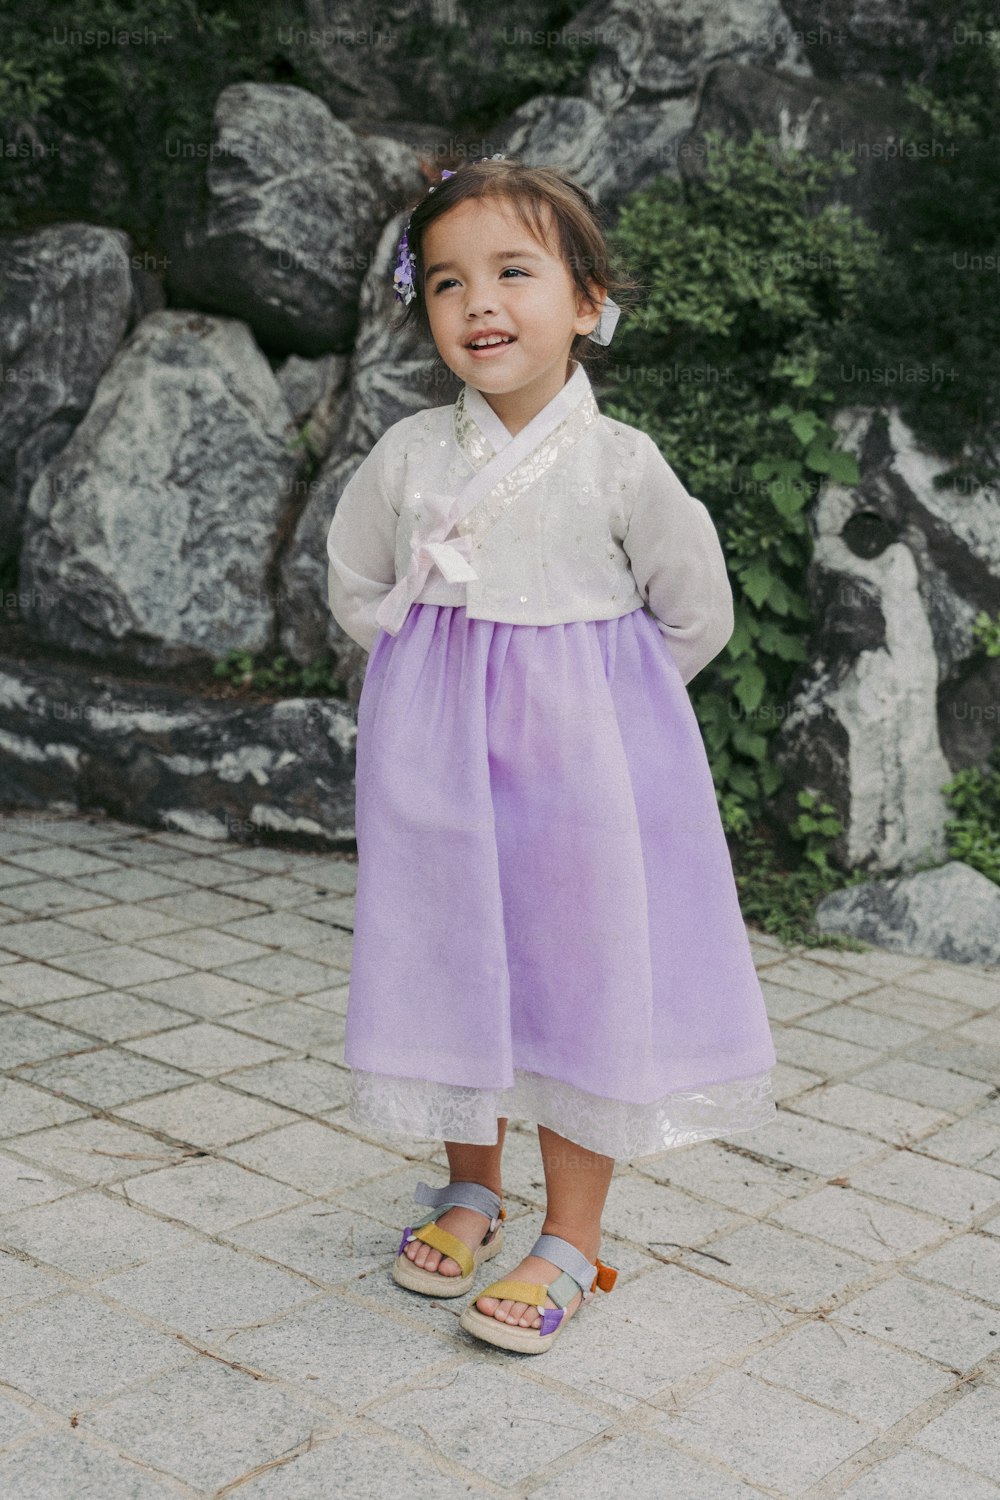 a little girl in a purple dress standing in front of some rocks